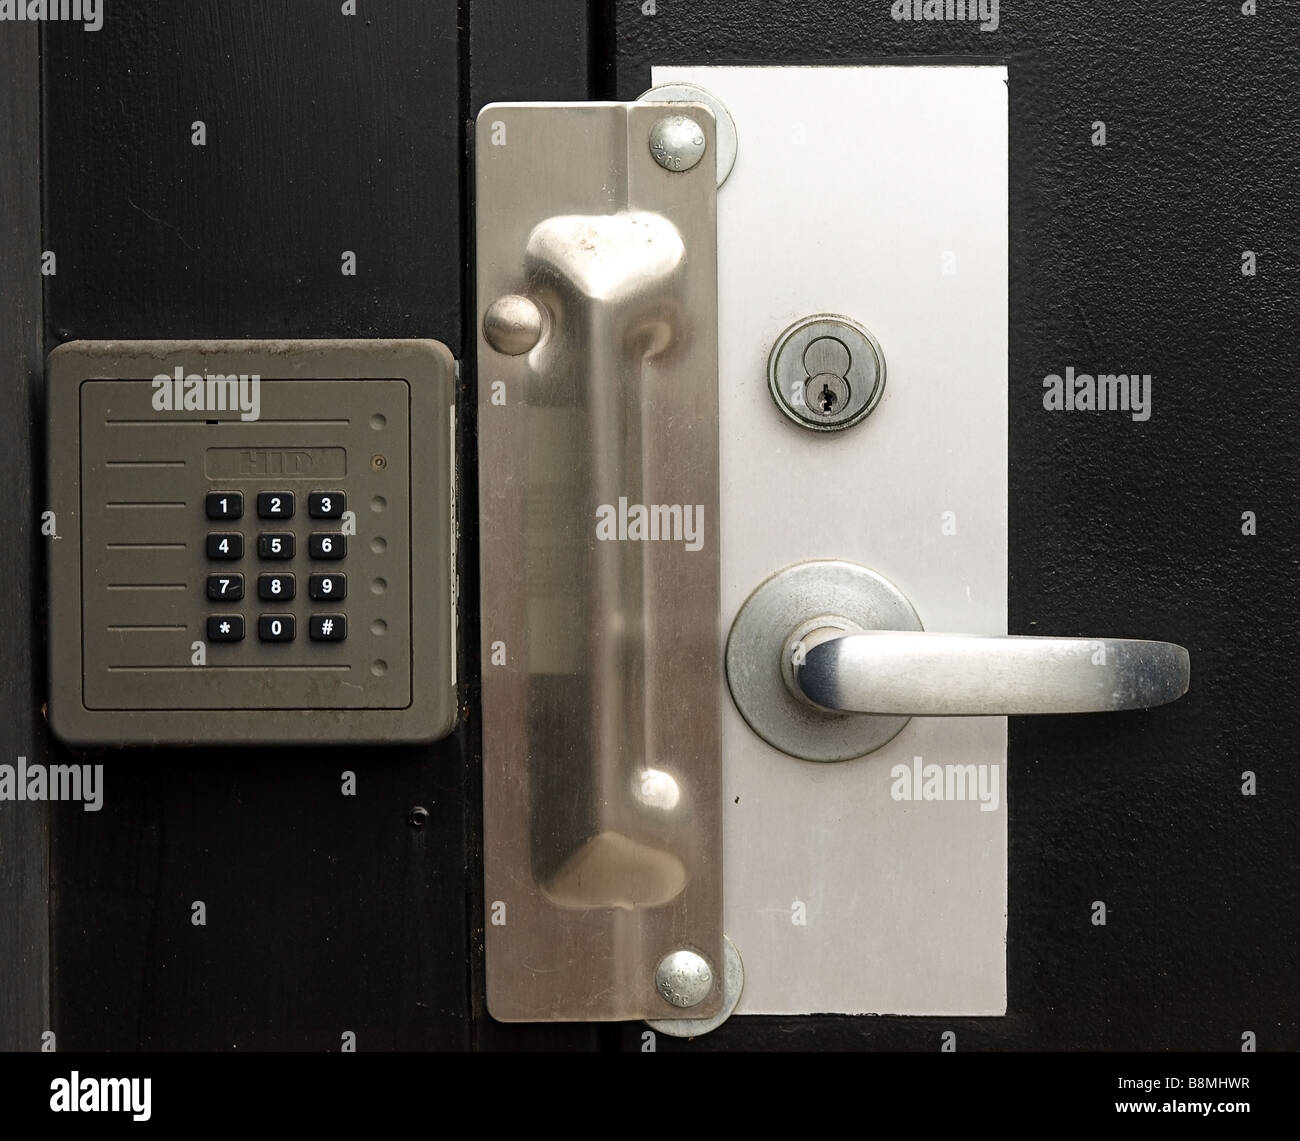 Stock photo of an electronic doorlock keypad and doorknob assembly in landscape format Stock Photo